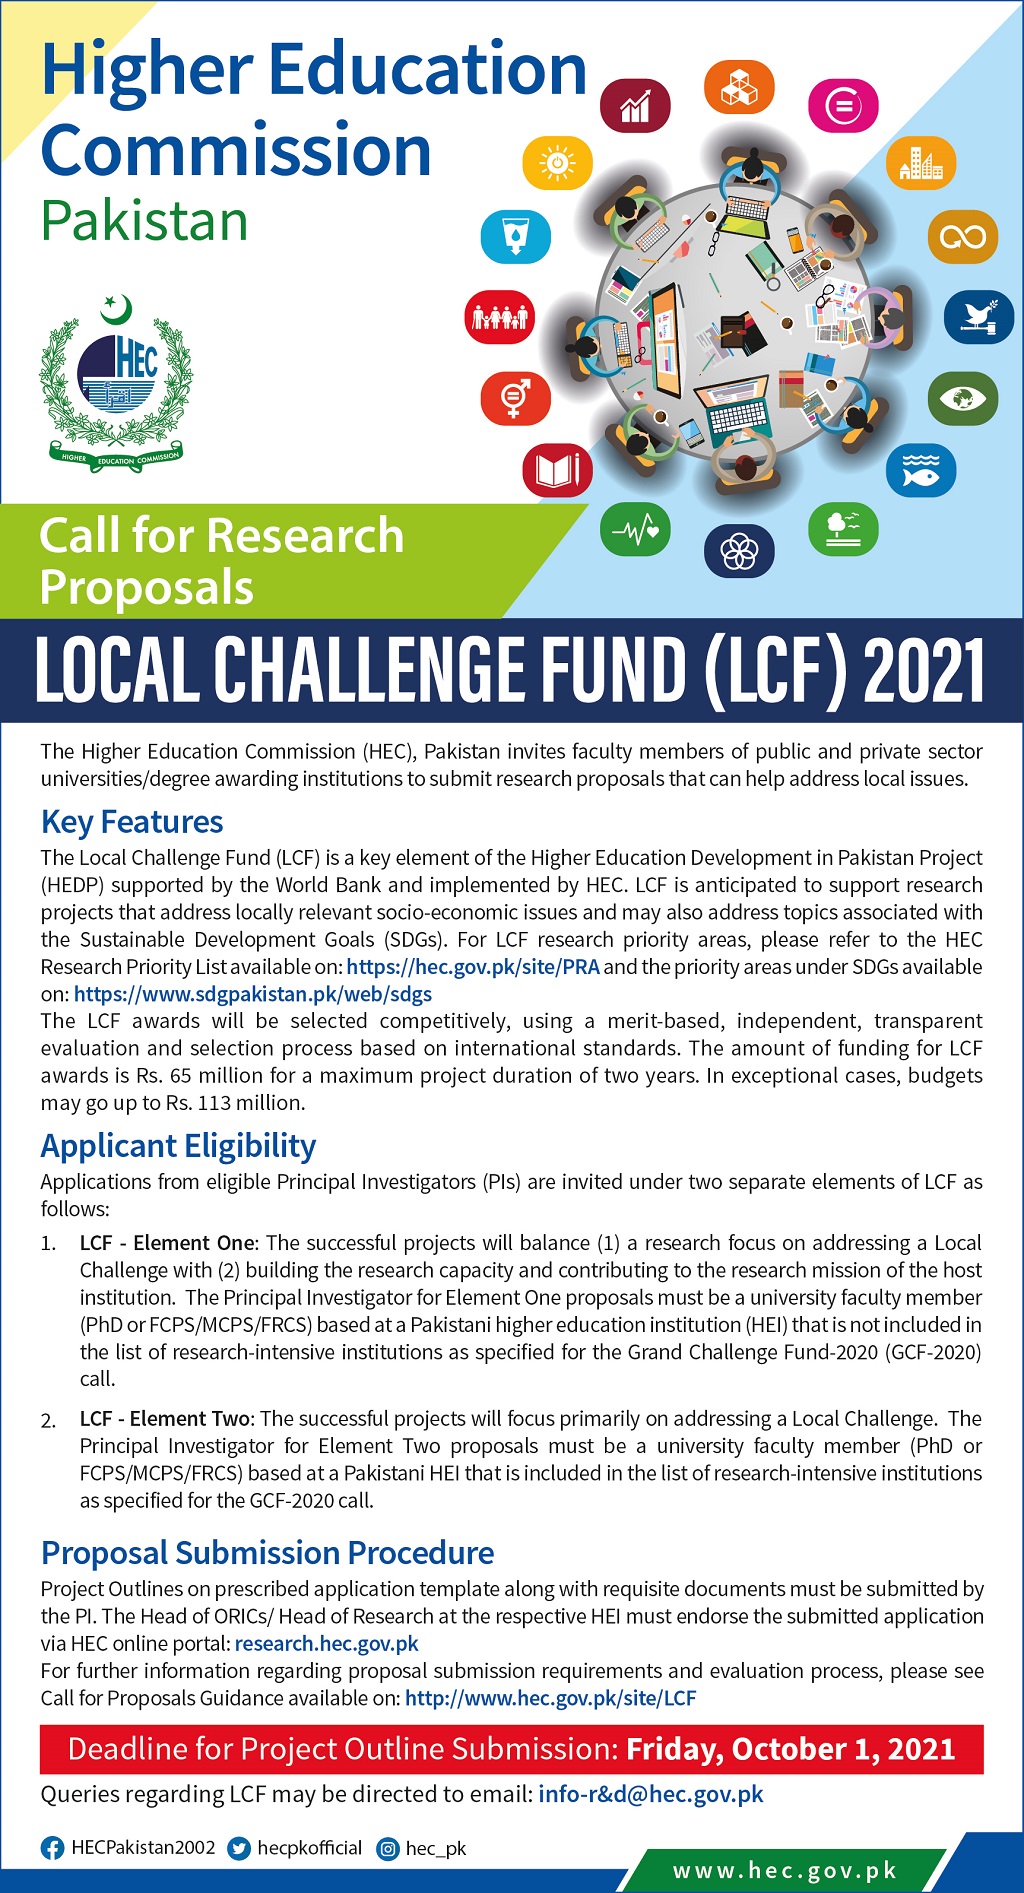 LOCAL CHALLENGE FUND (LCF) by HEC